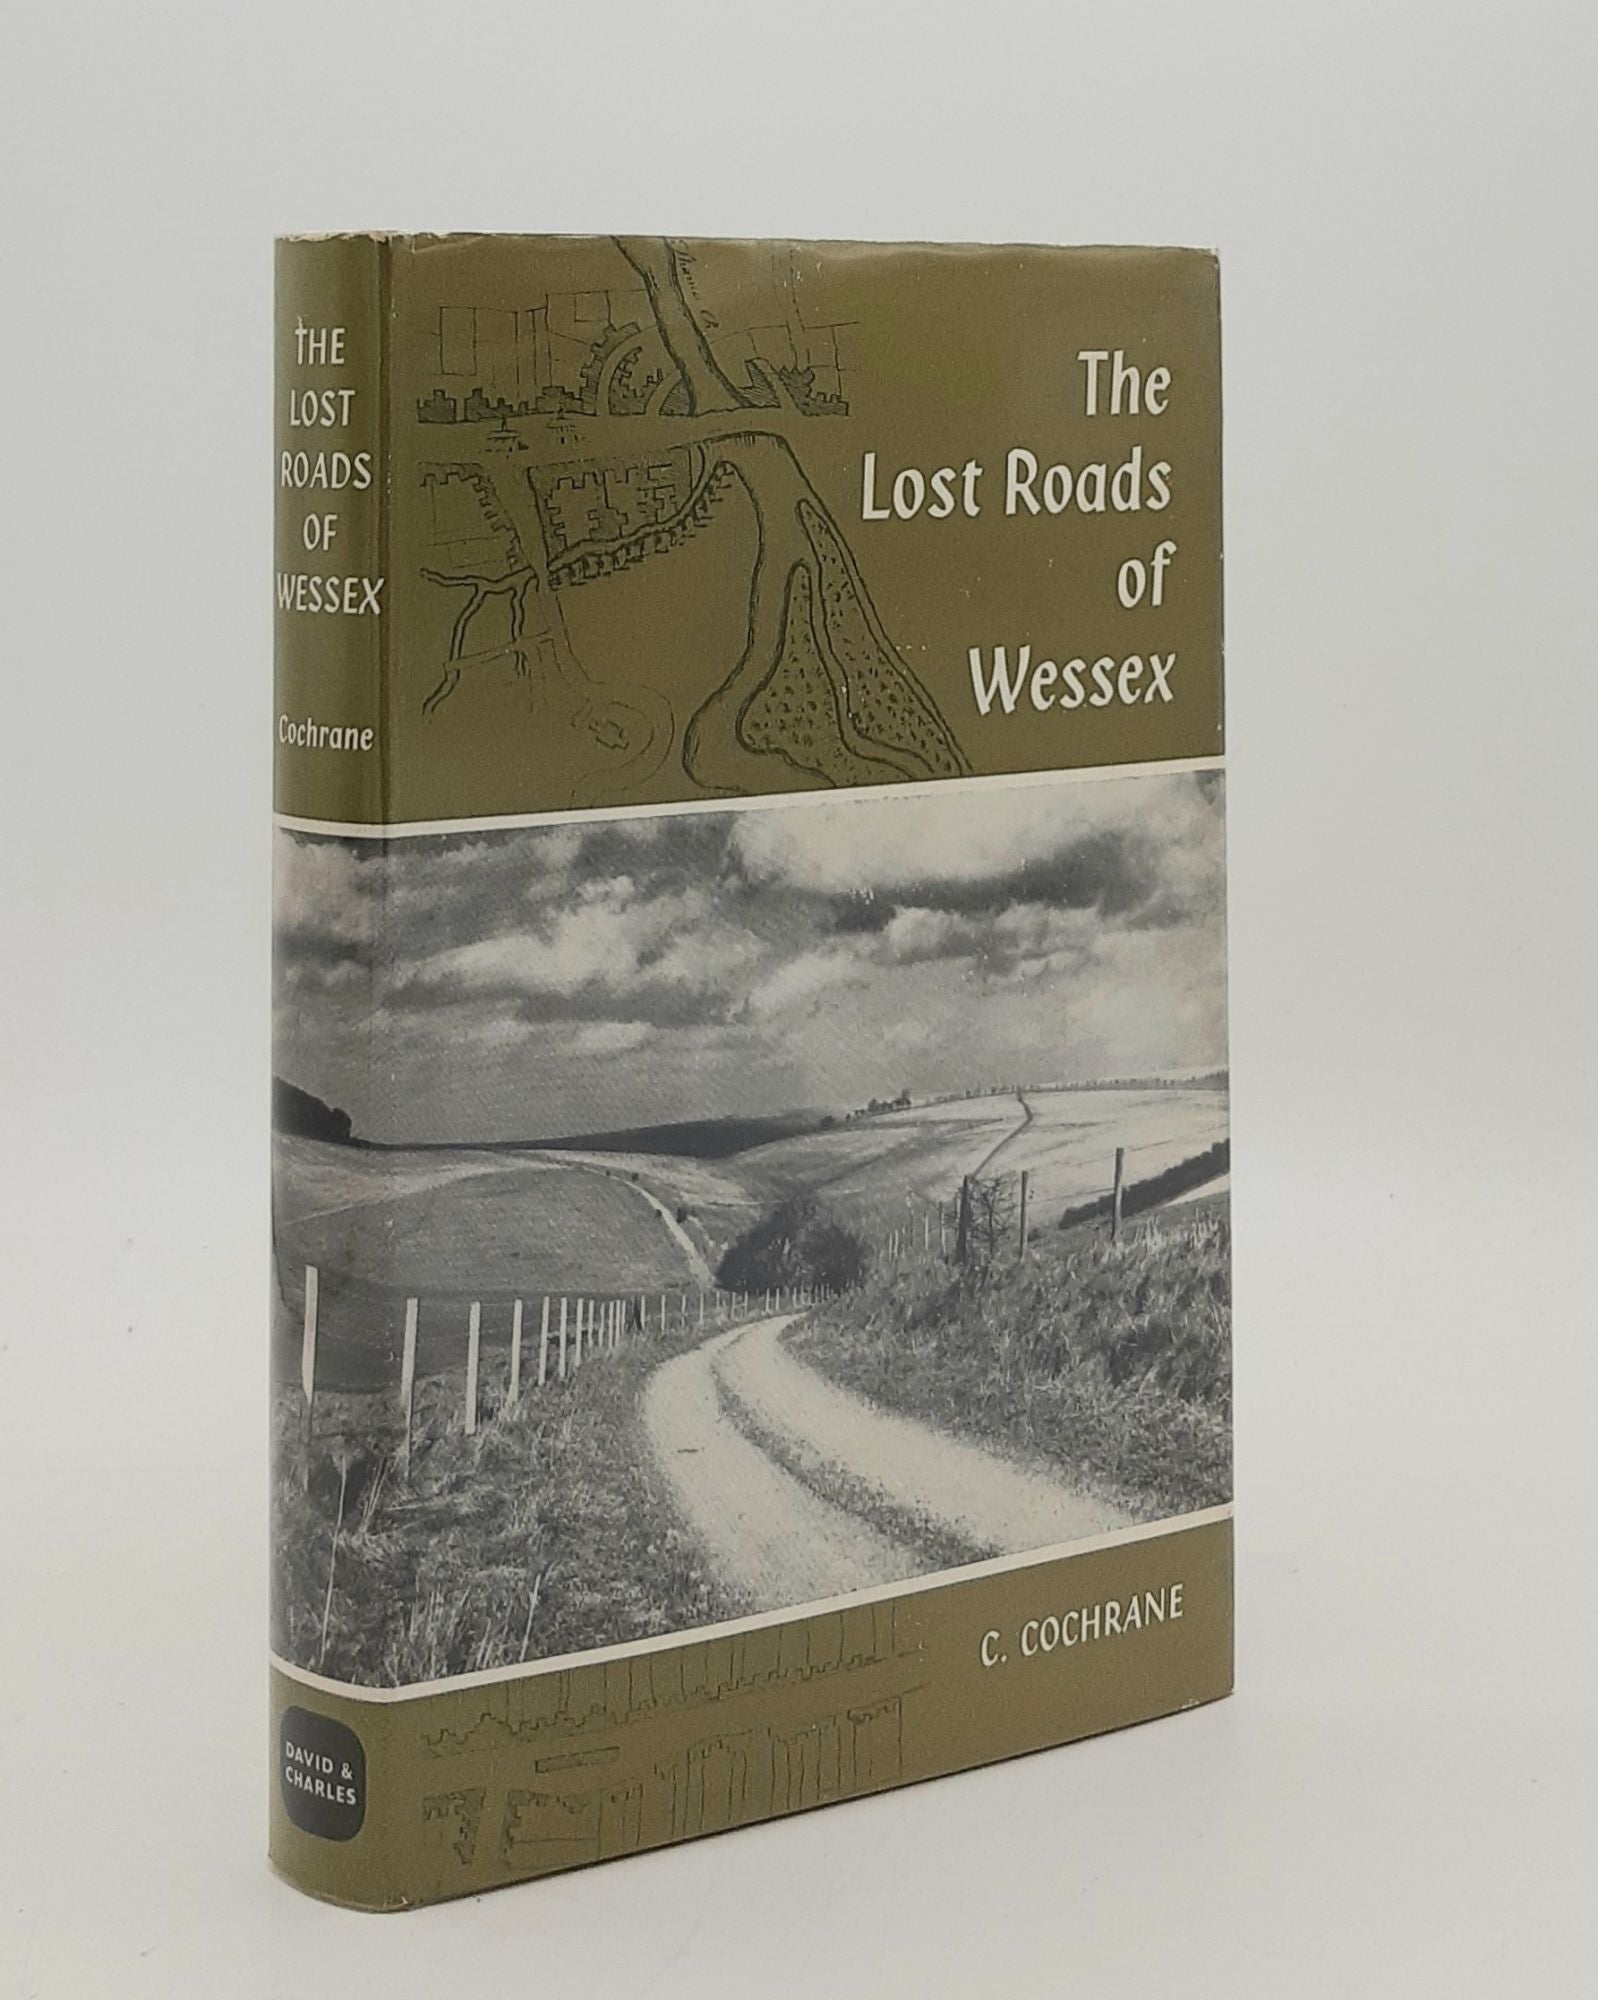 COCHRANE C. - The Lost Roads of Wessex